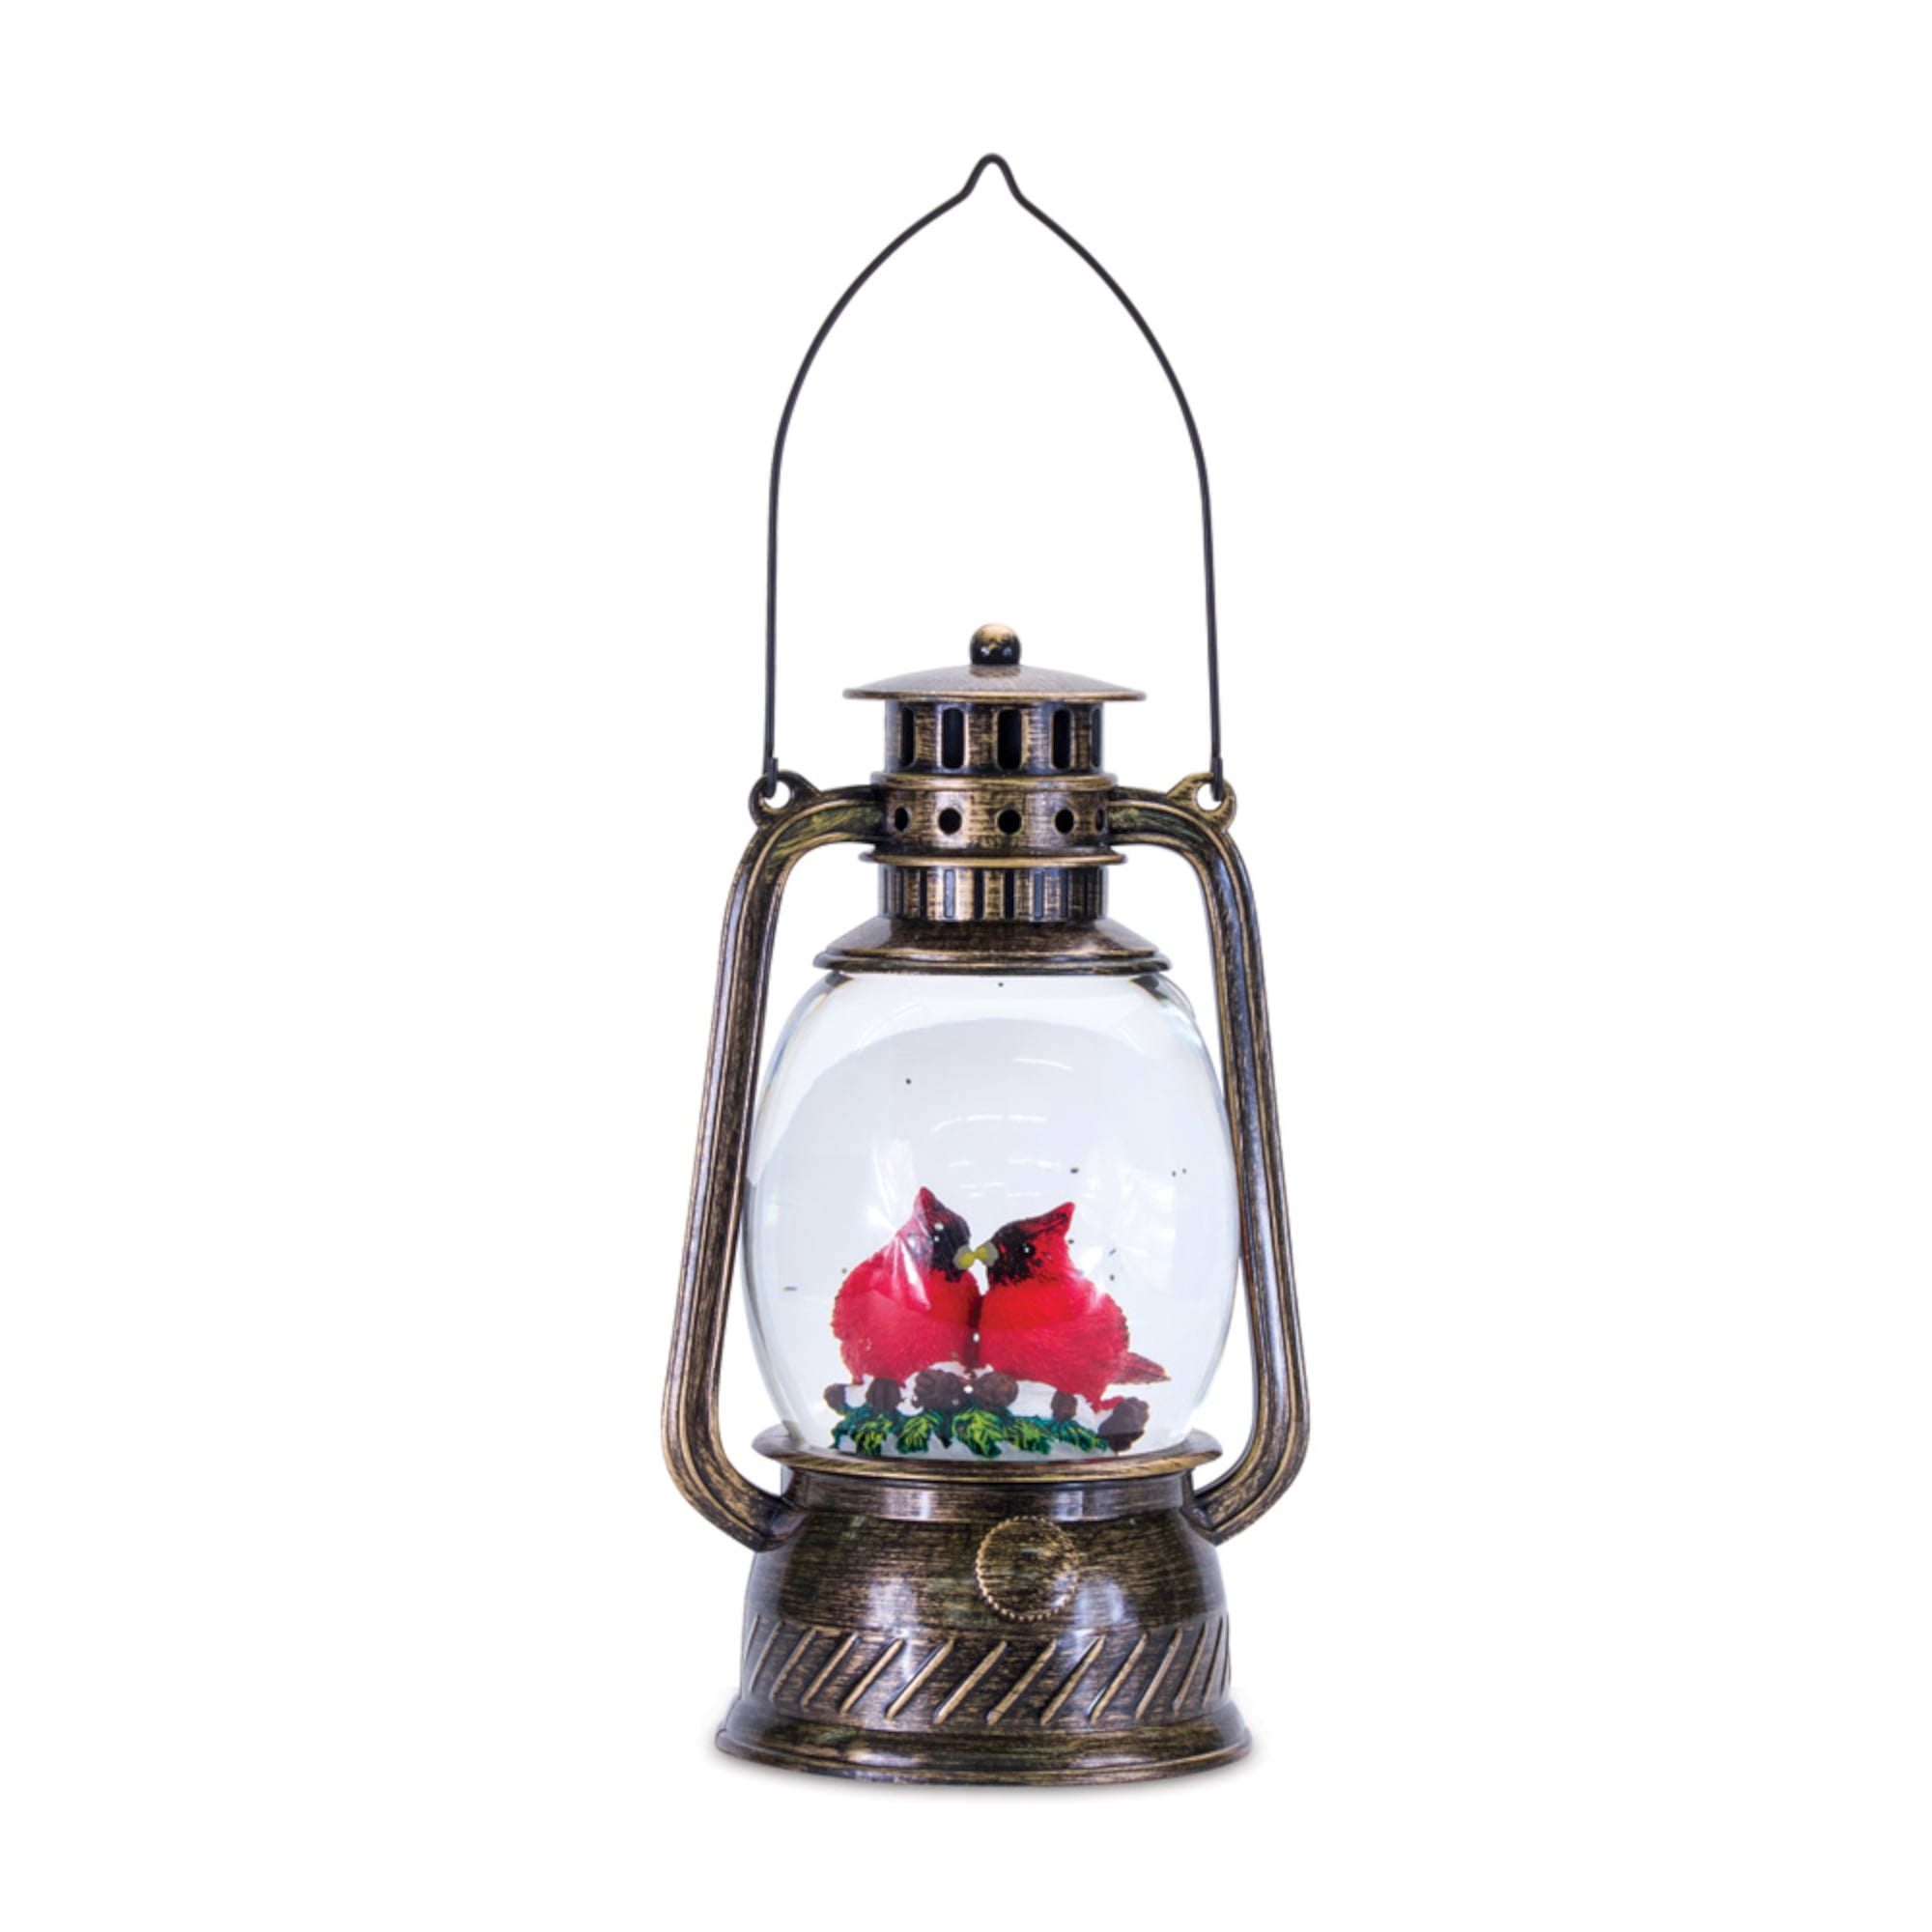 Snow Globe Lantern w/Cardinal 11.5"H Plastic 6 Hr Timer 3 AA Batteries, Not Included or USB Cord Included